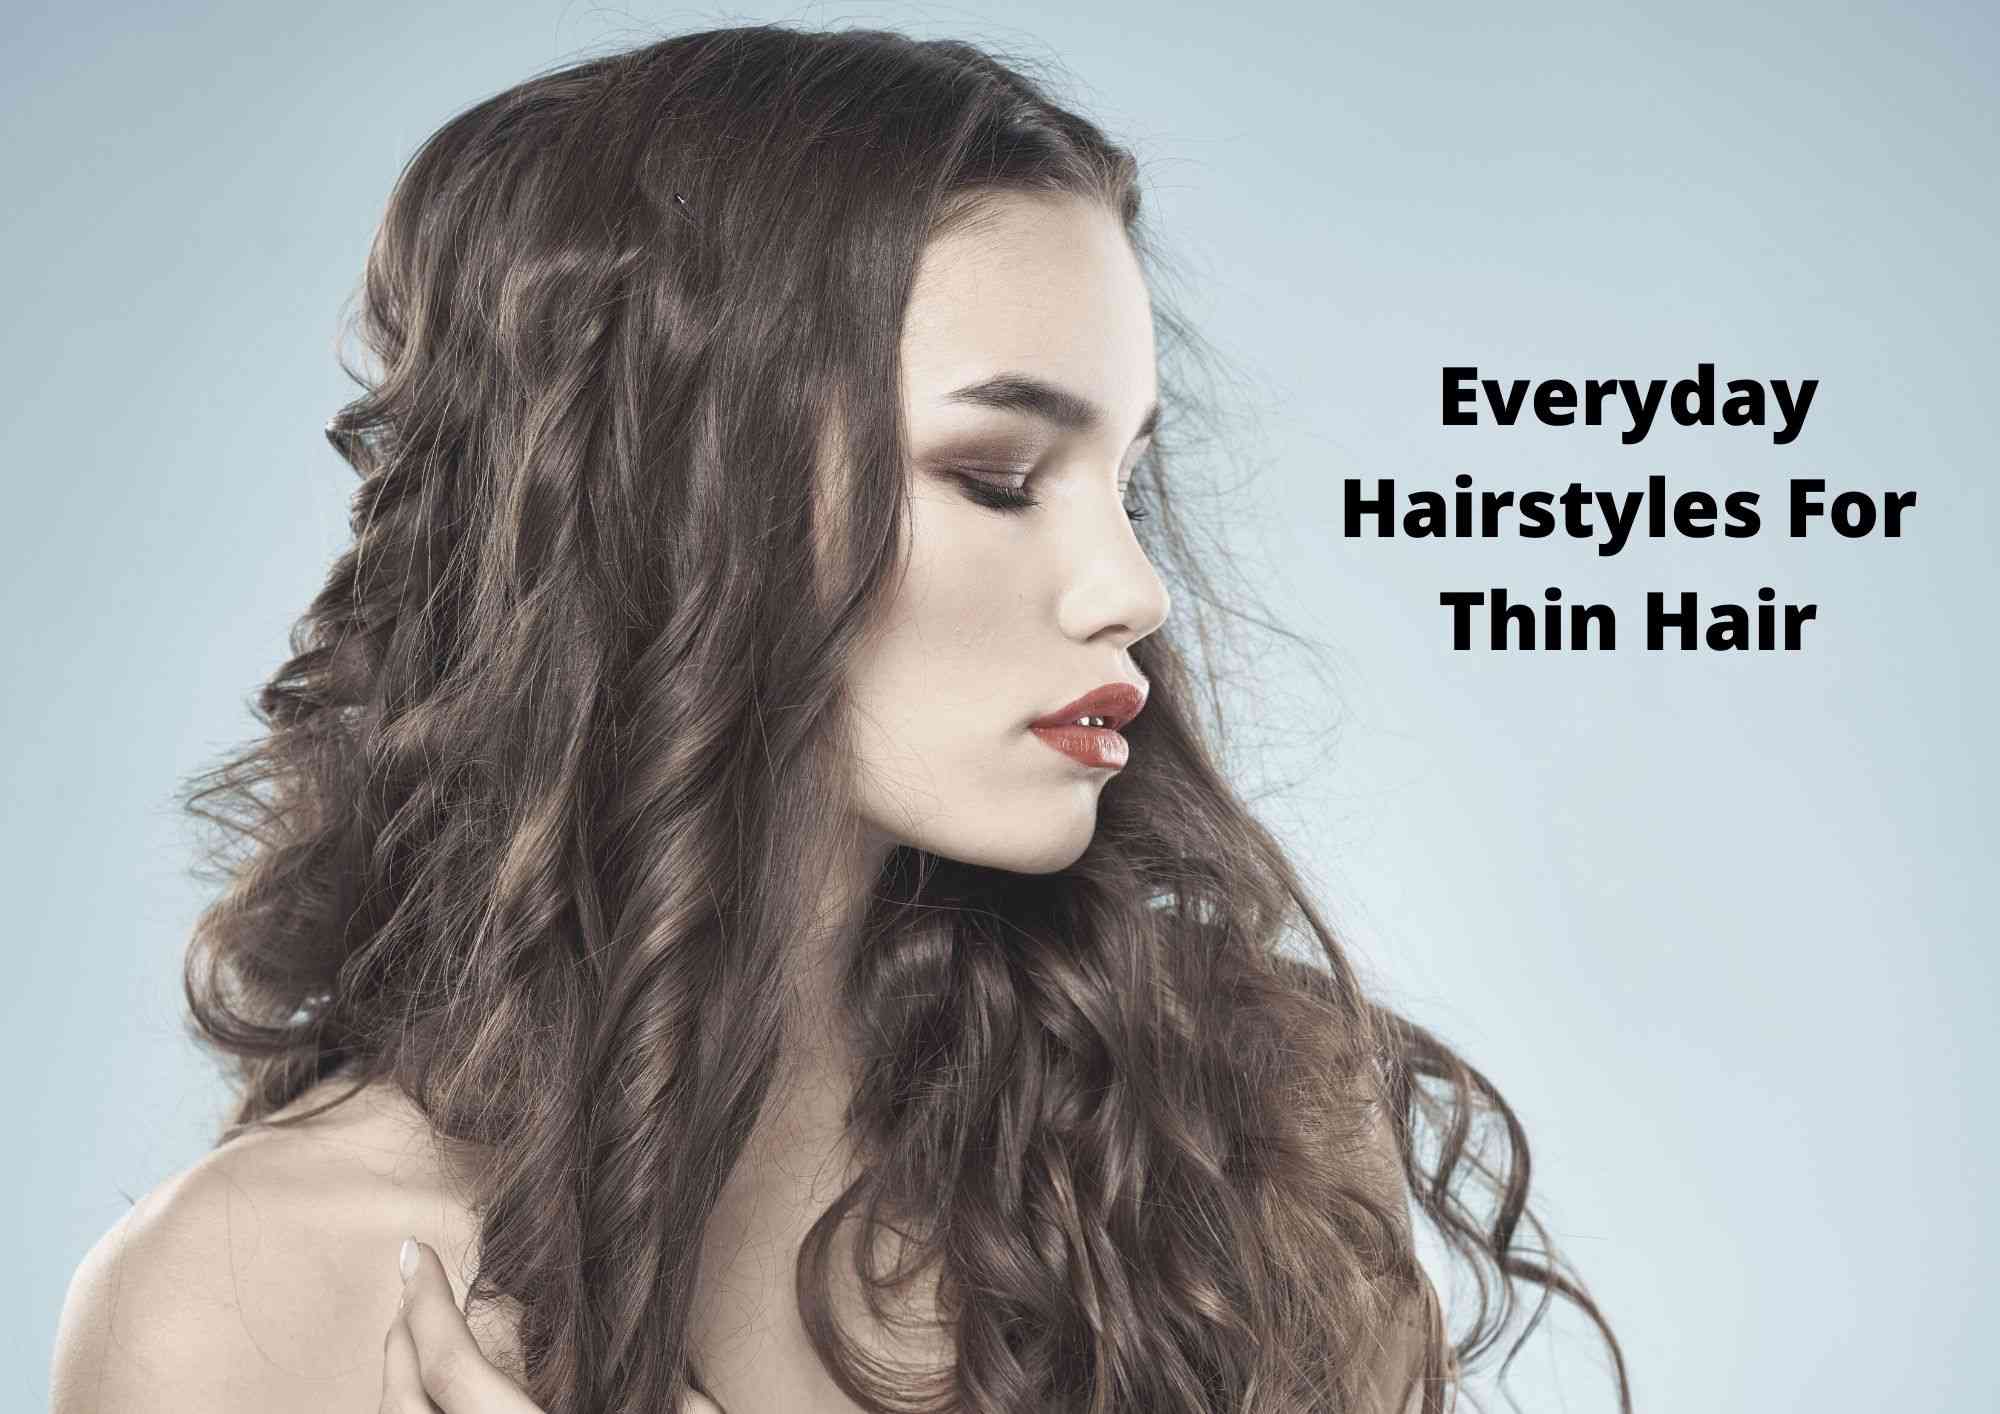 20 Easy Everyday Hairstyles For Thin Hair 2023 | Awesome Hairstyles For  Long, Fine Hair - Hair Everyday Review